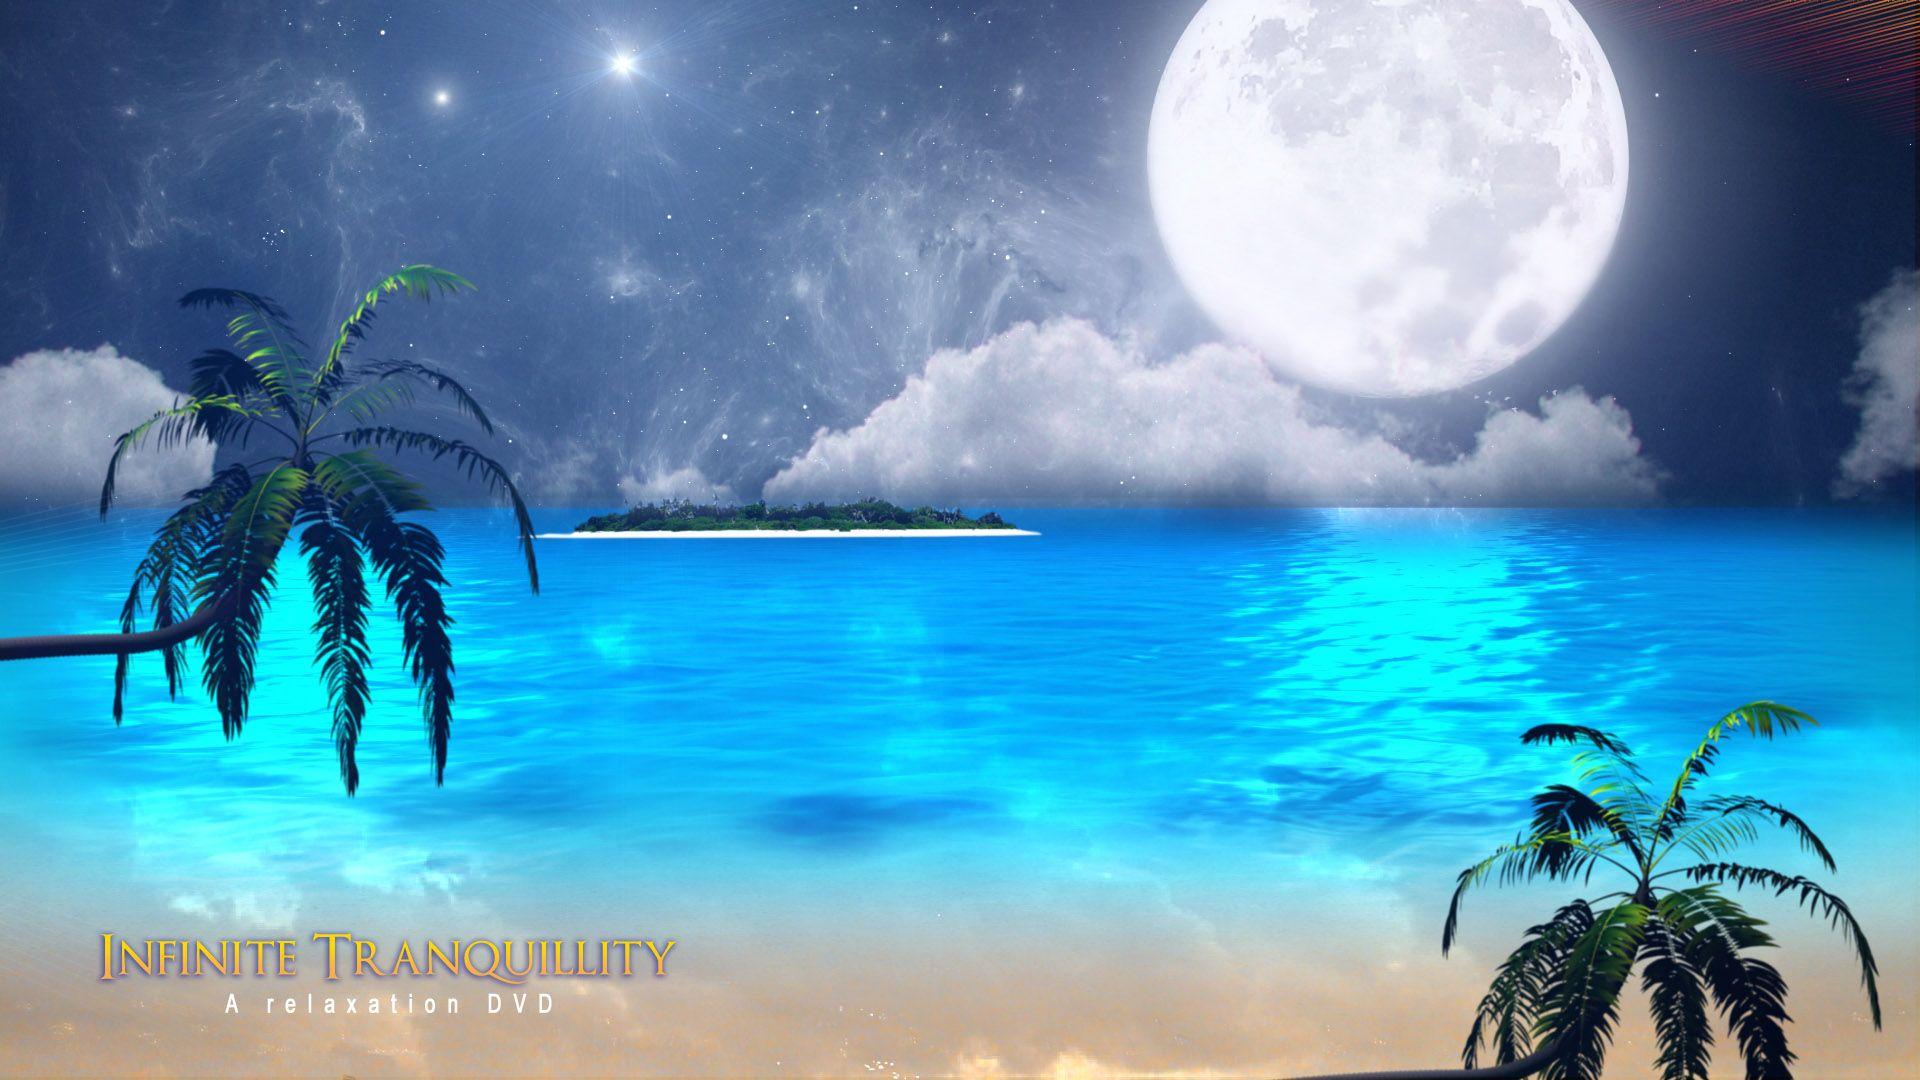 oeans and beaches. Infinite Tranquility. Download relaxation